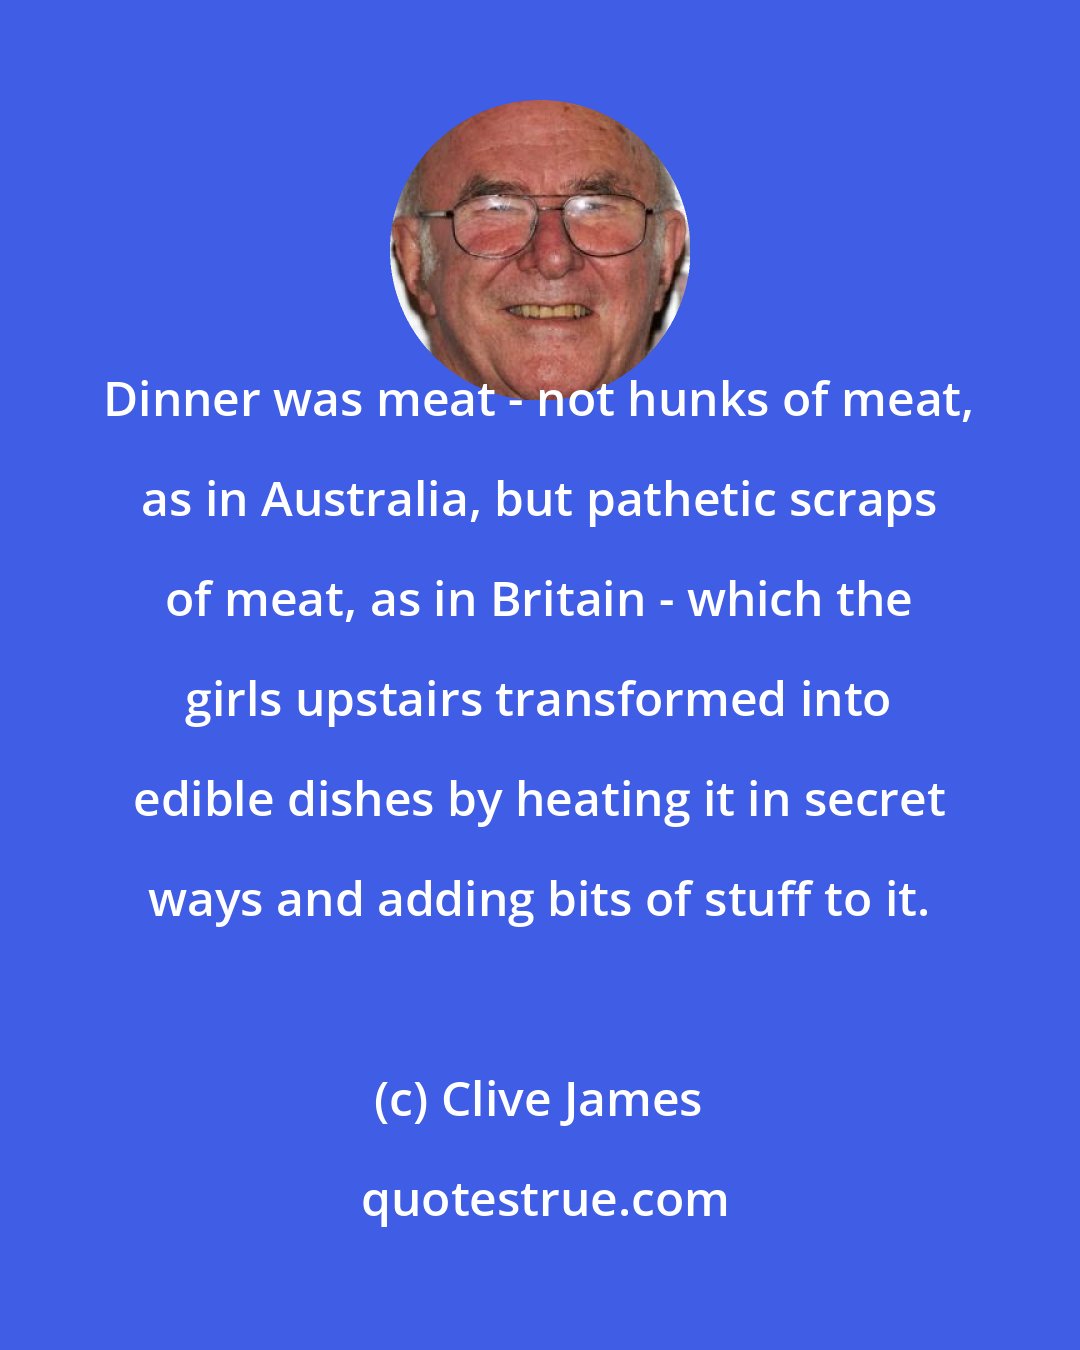 Clive James: Dinner was meat - not hunks of meat, as in Australia, but pathetic scraps of meat, as in Britain - which the girls upstairs transformed into edible dishes by heating it in secret ways and adding bits of stuff to it.